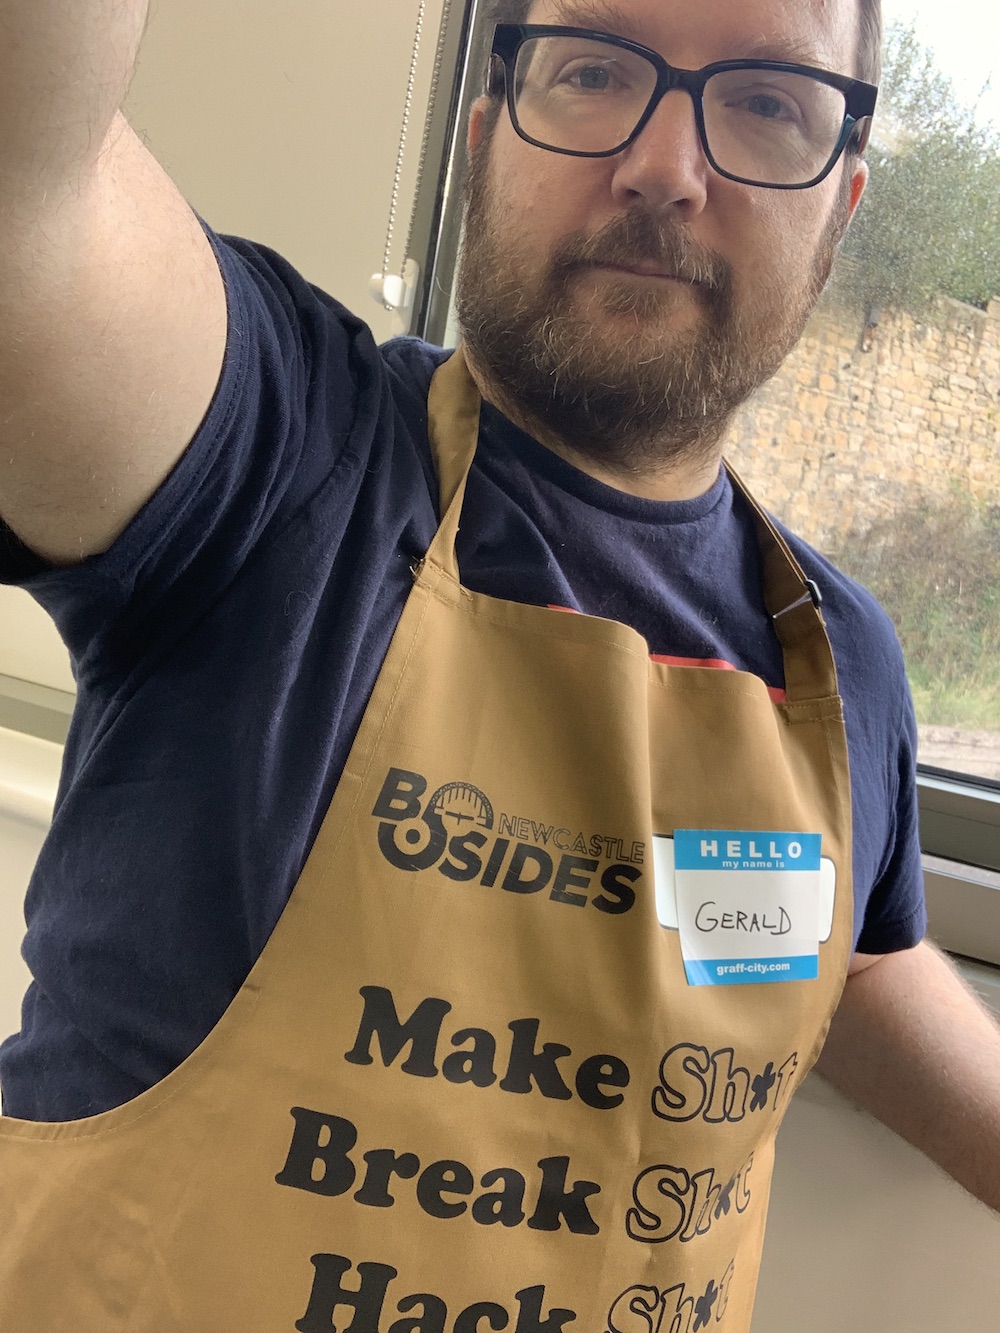 Me in an Apron